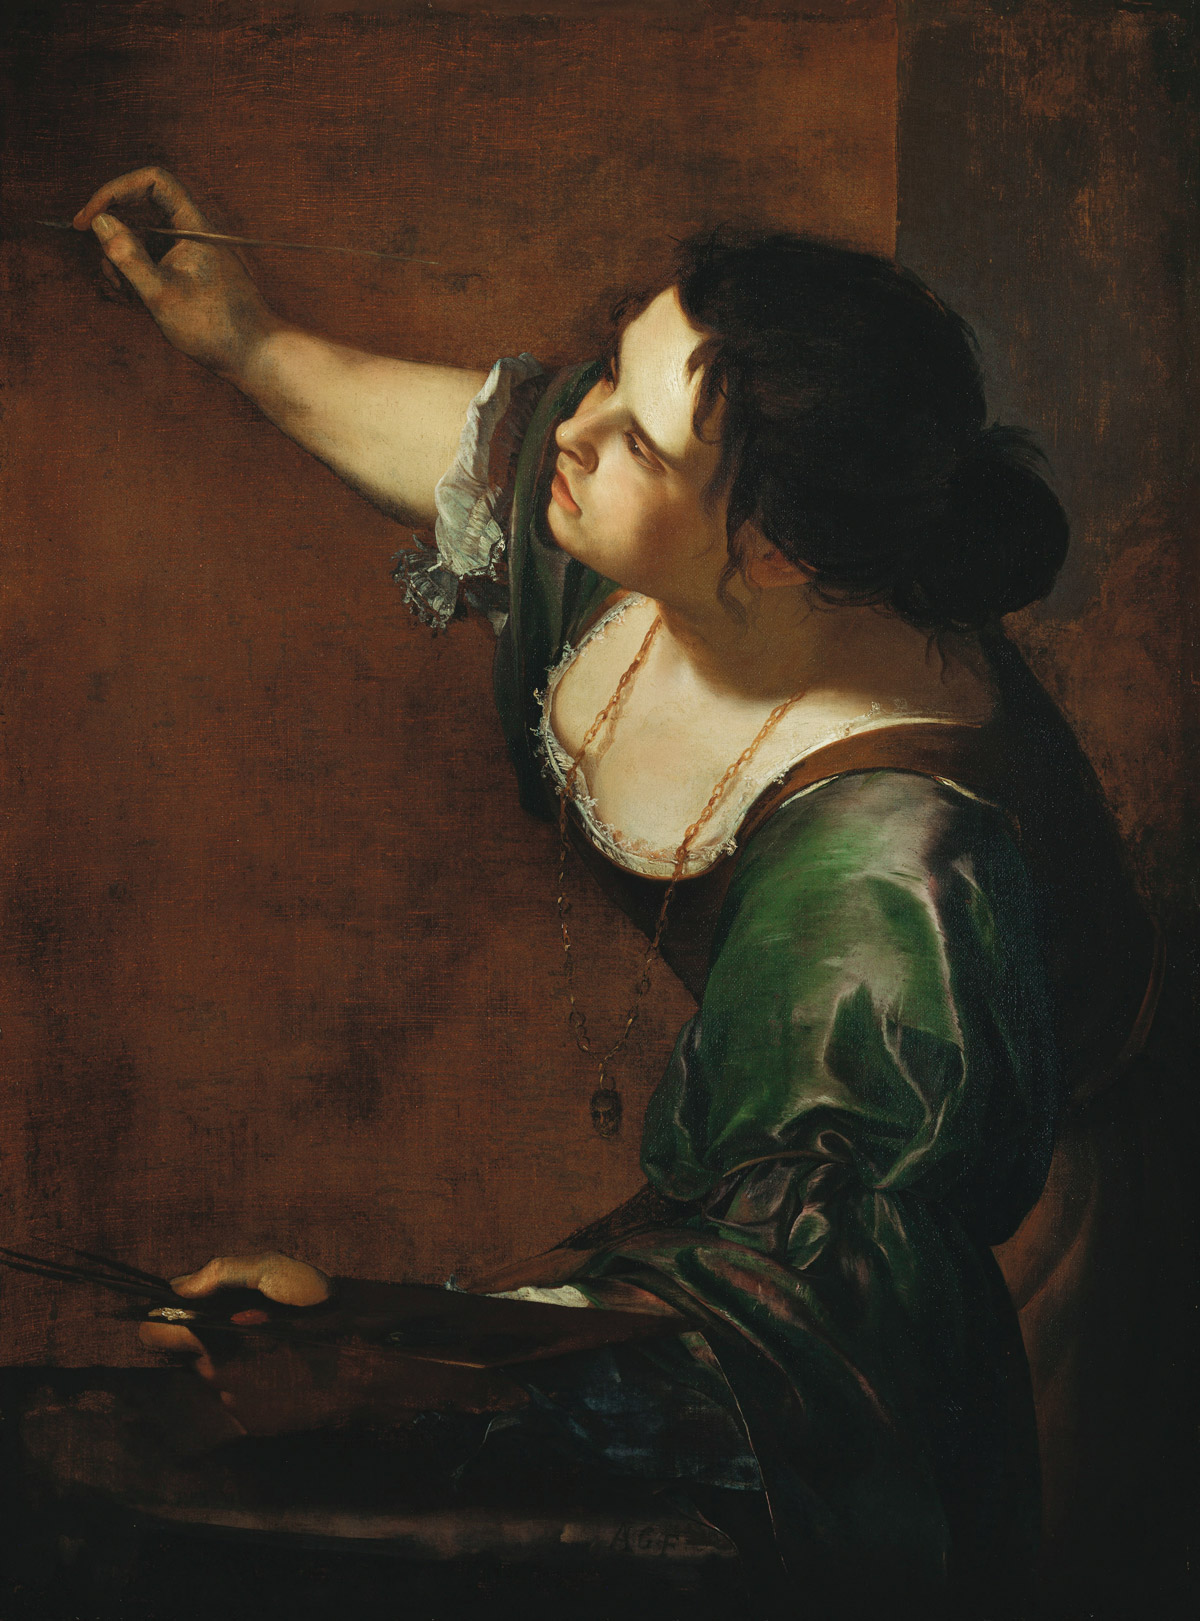 Artemisia Gentileschi's painting Self-Portrait as the Allegory of Painting